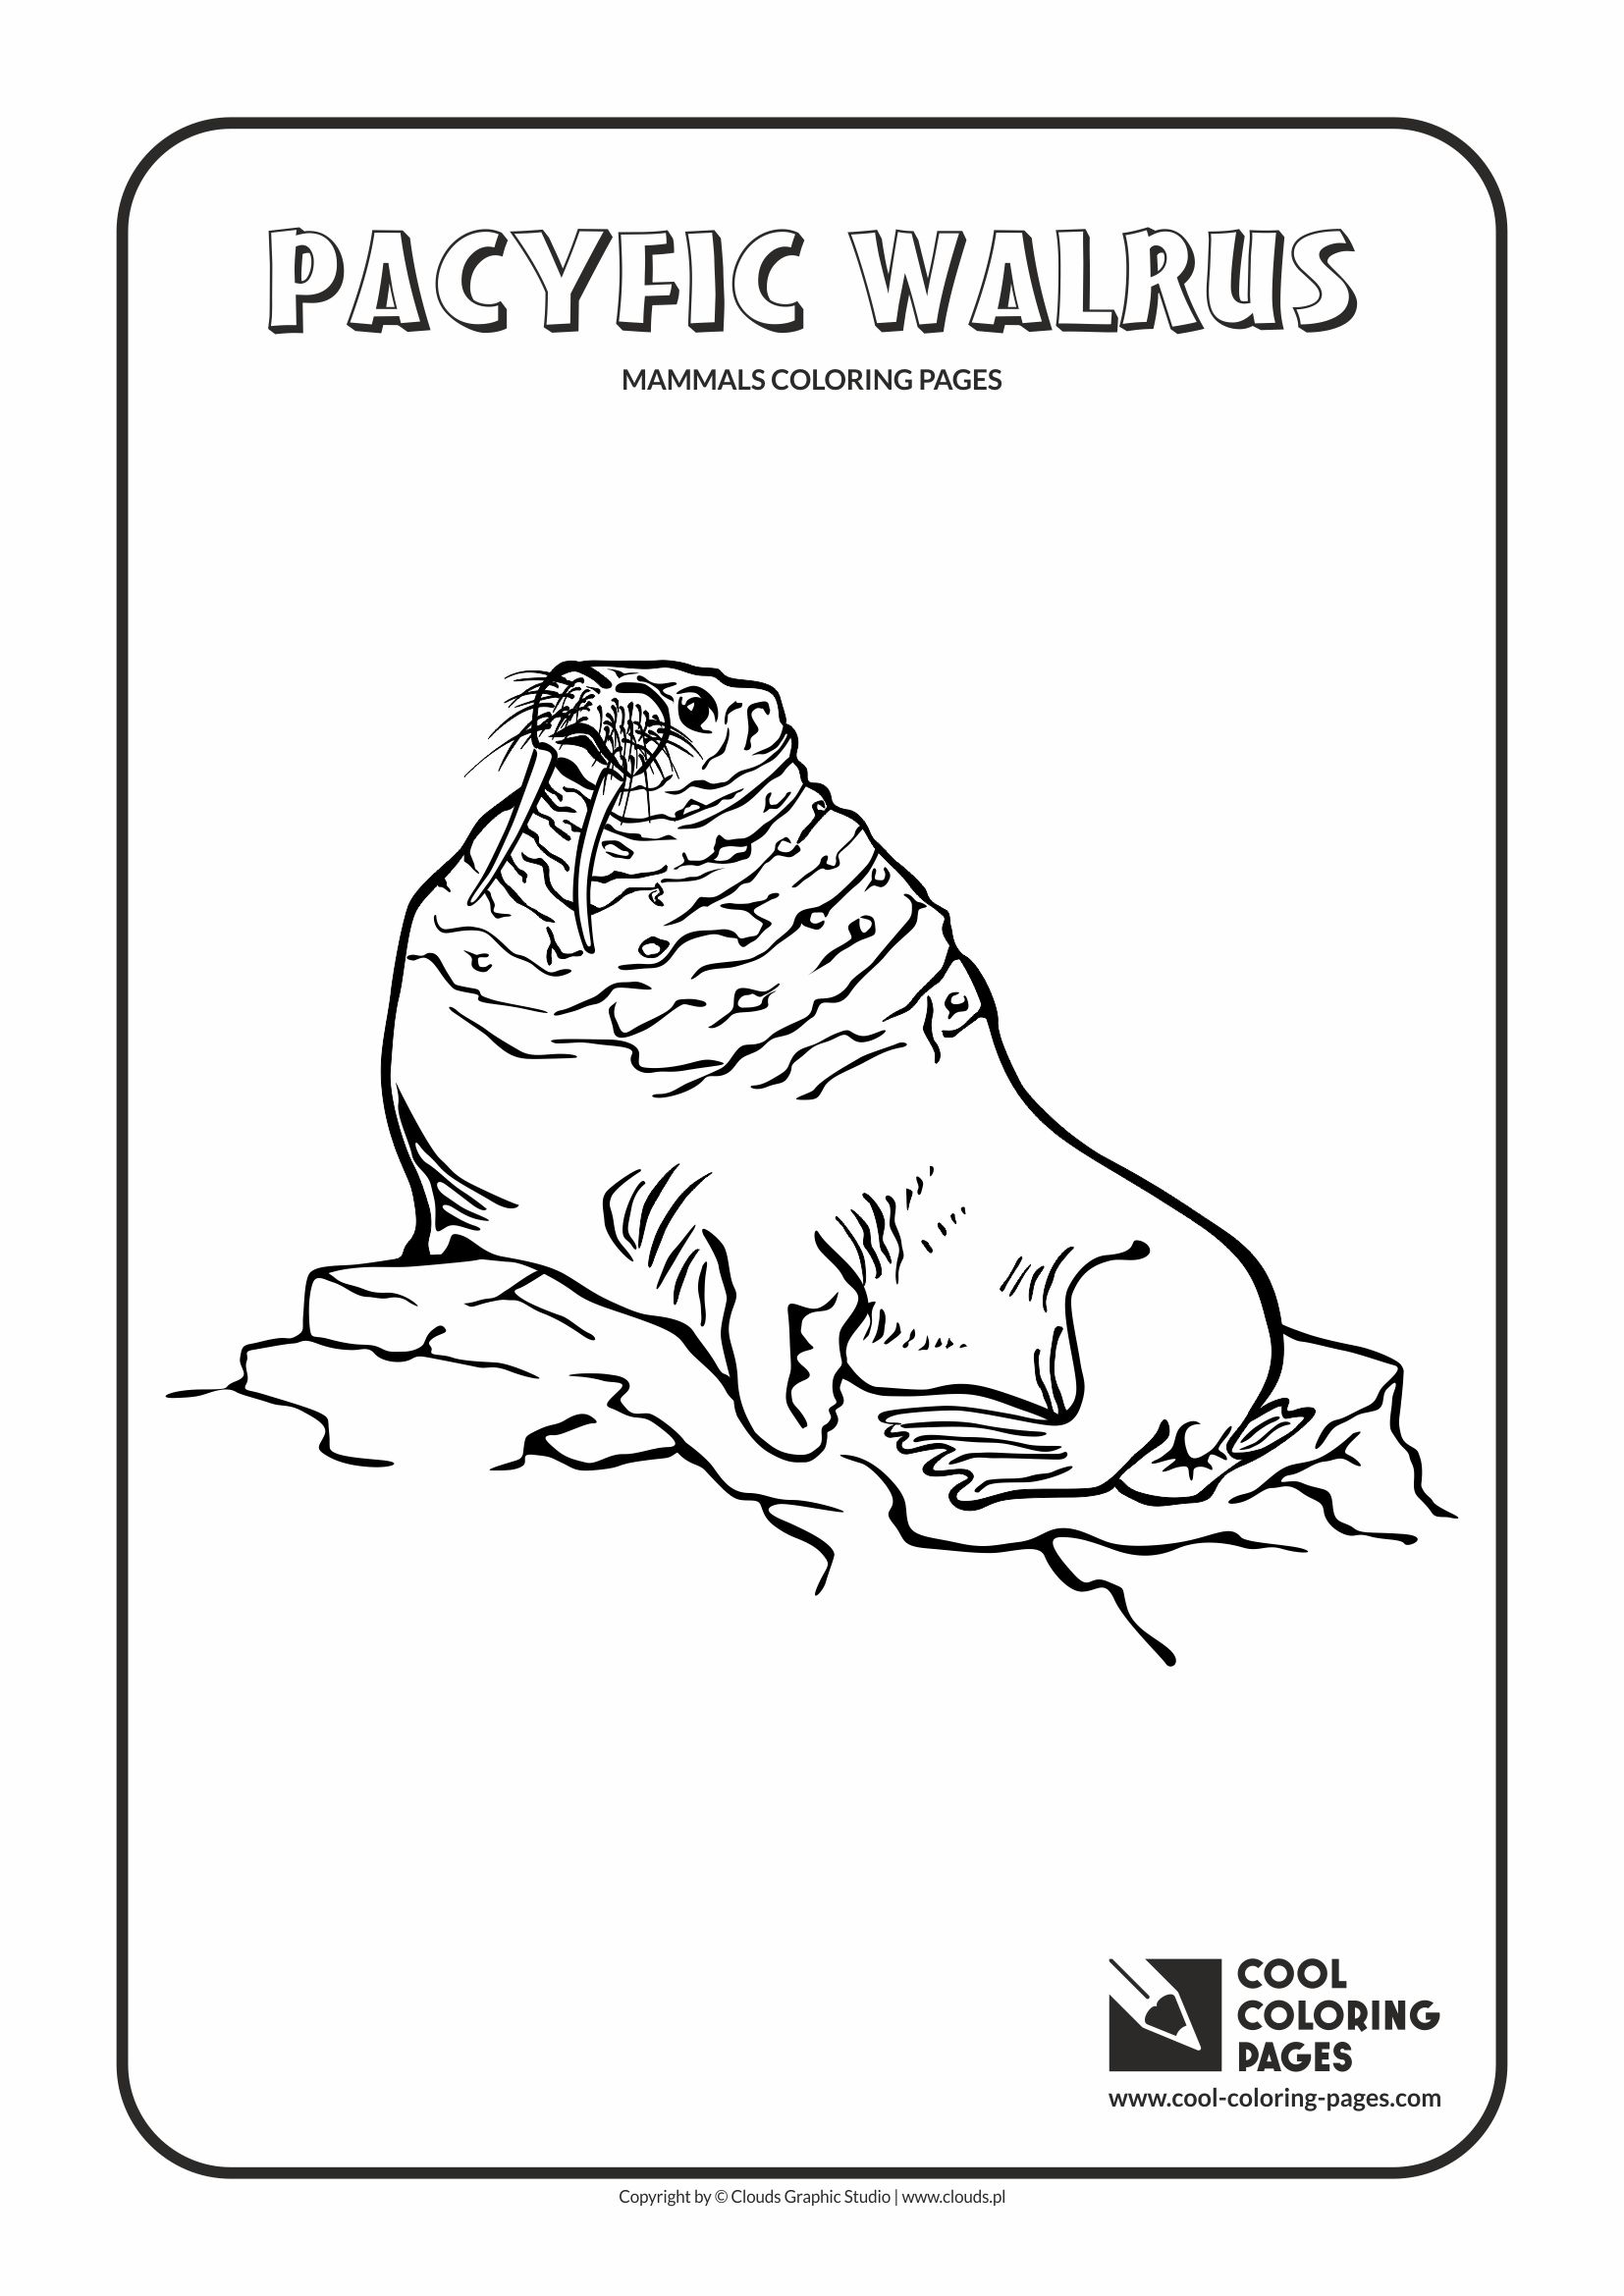 Cool Coloring Pages - Animals / Pacific walrus / Coloring page with pacific walrus